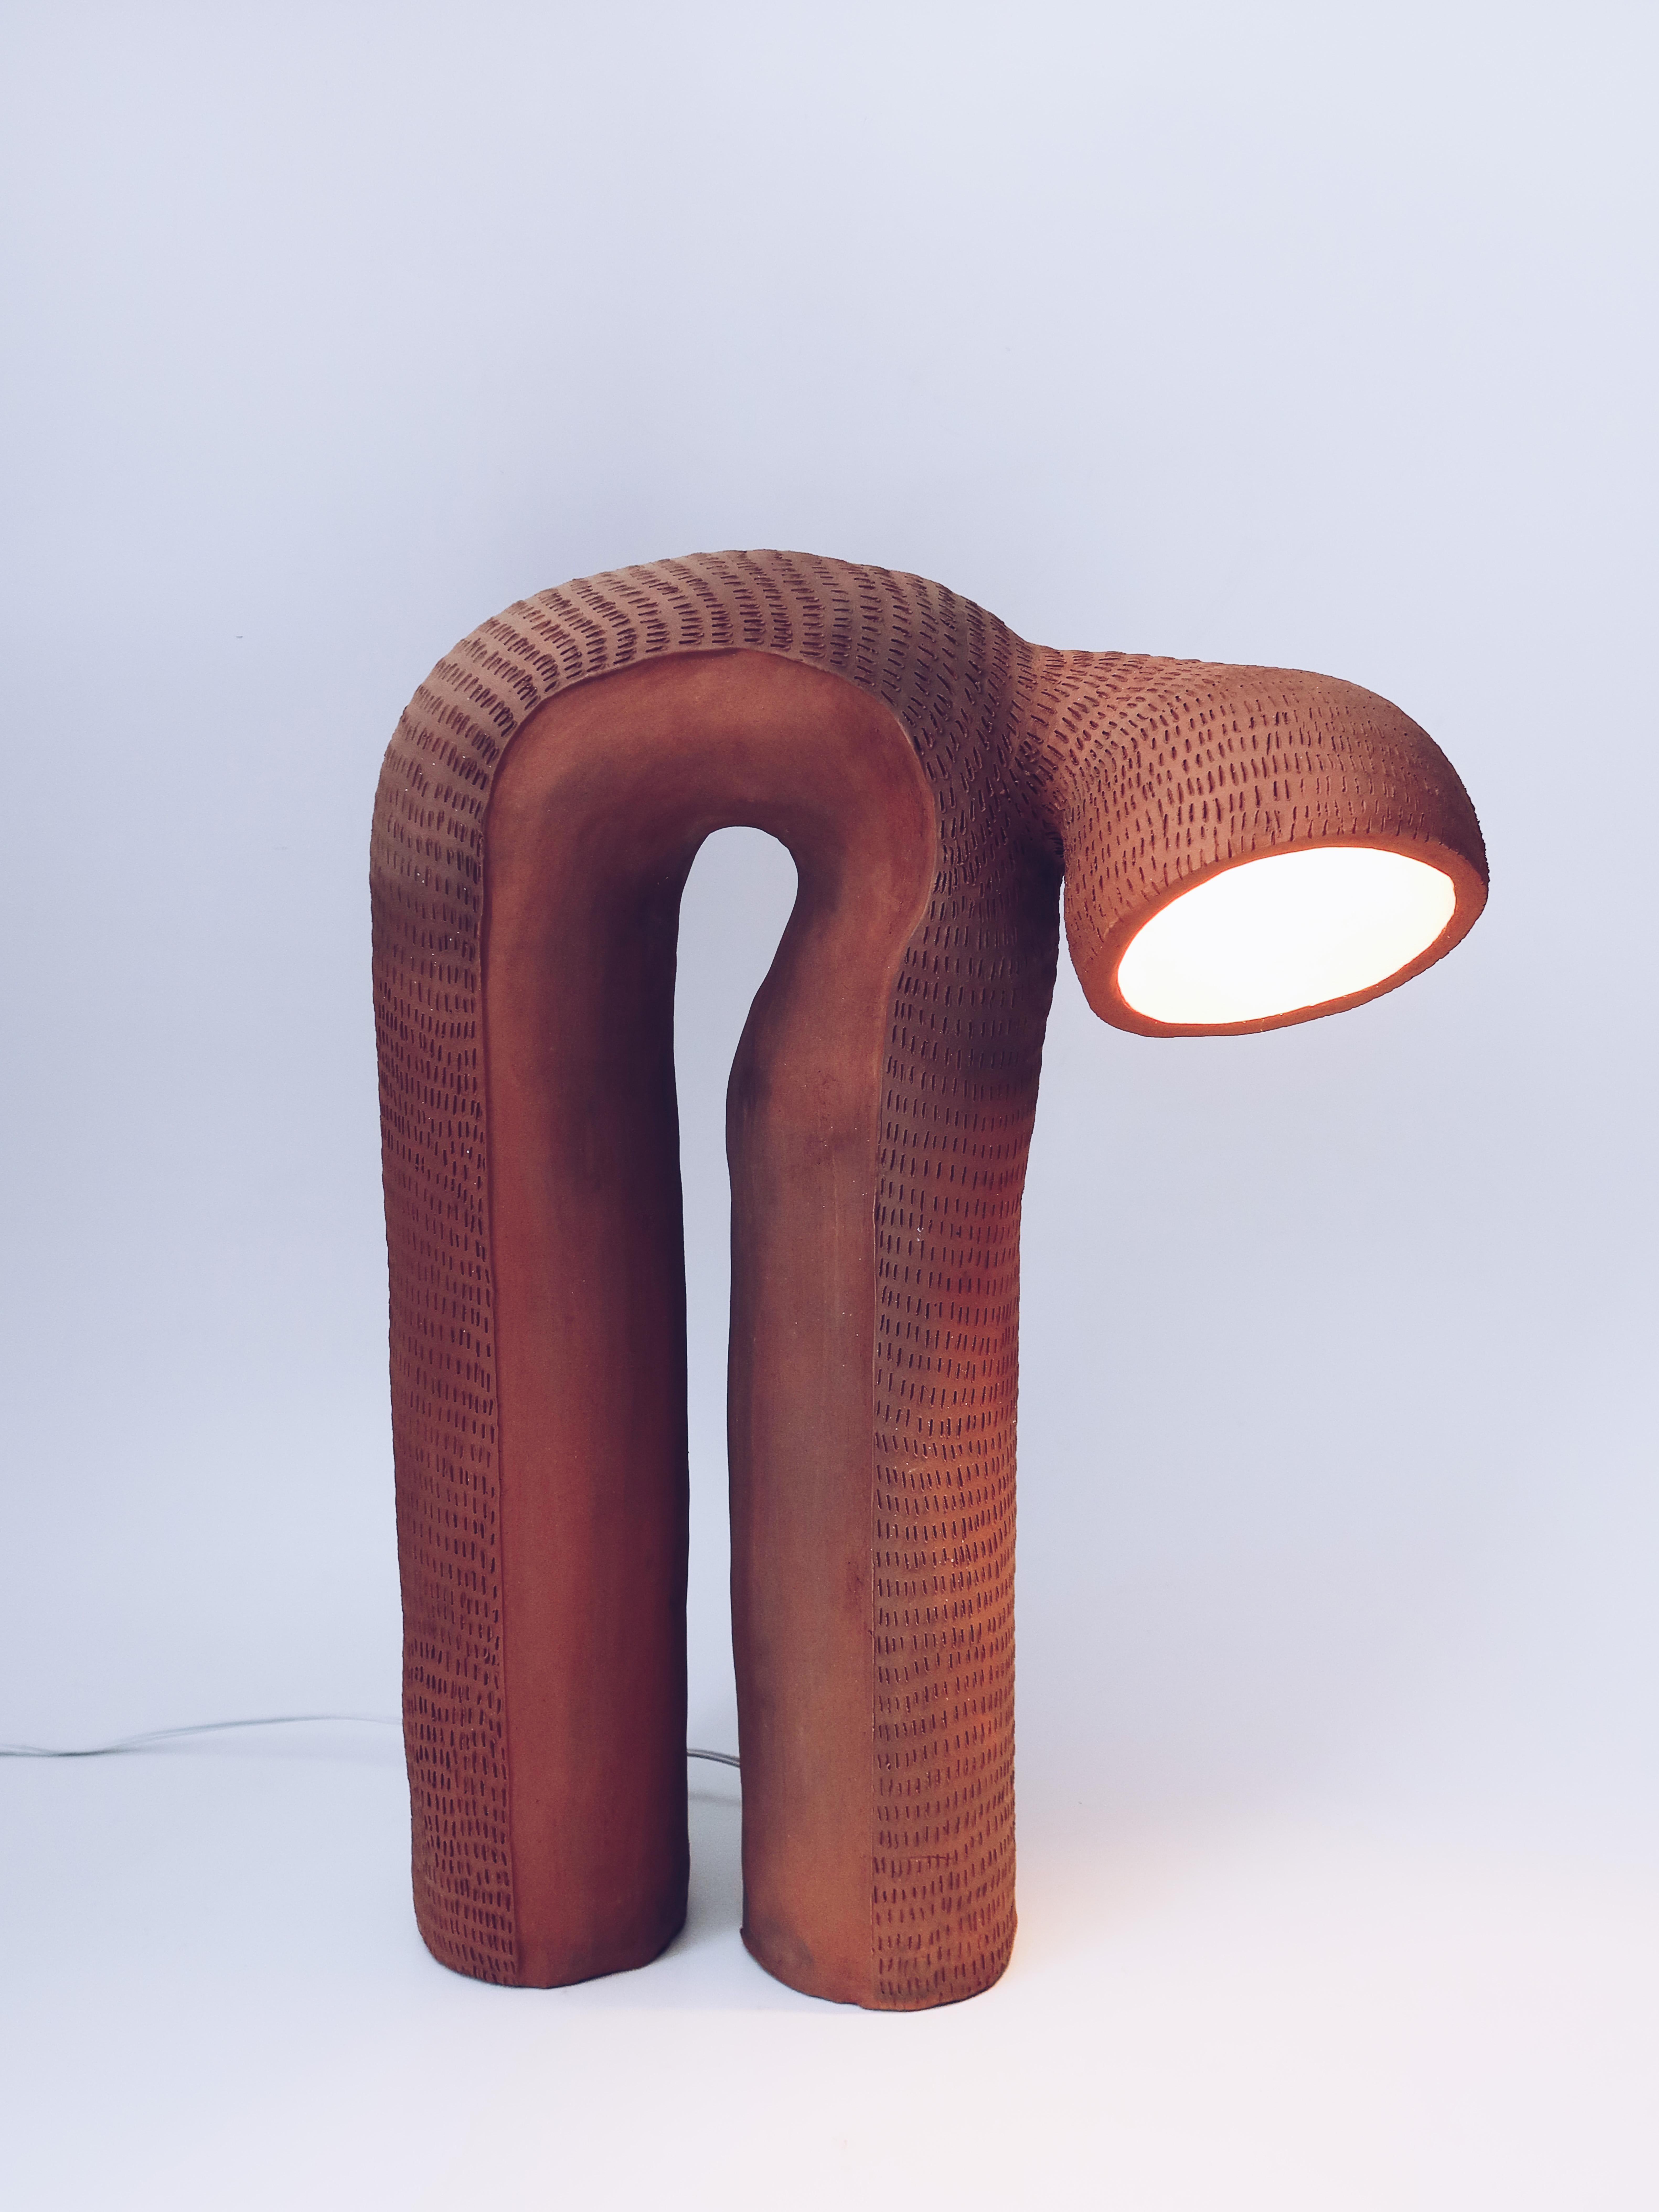 Sheye lamp by Jan Ernst
Dimensions: W 40 x D 15 x H 50 cm
Materials: Terracotta, white stoneware

All our lamps can be wired according to each country. If sold to the USA it will be wired for the USA for instance

Jan Ernst’s work takes on an